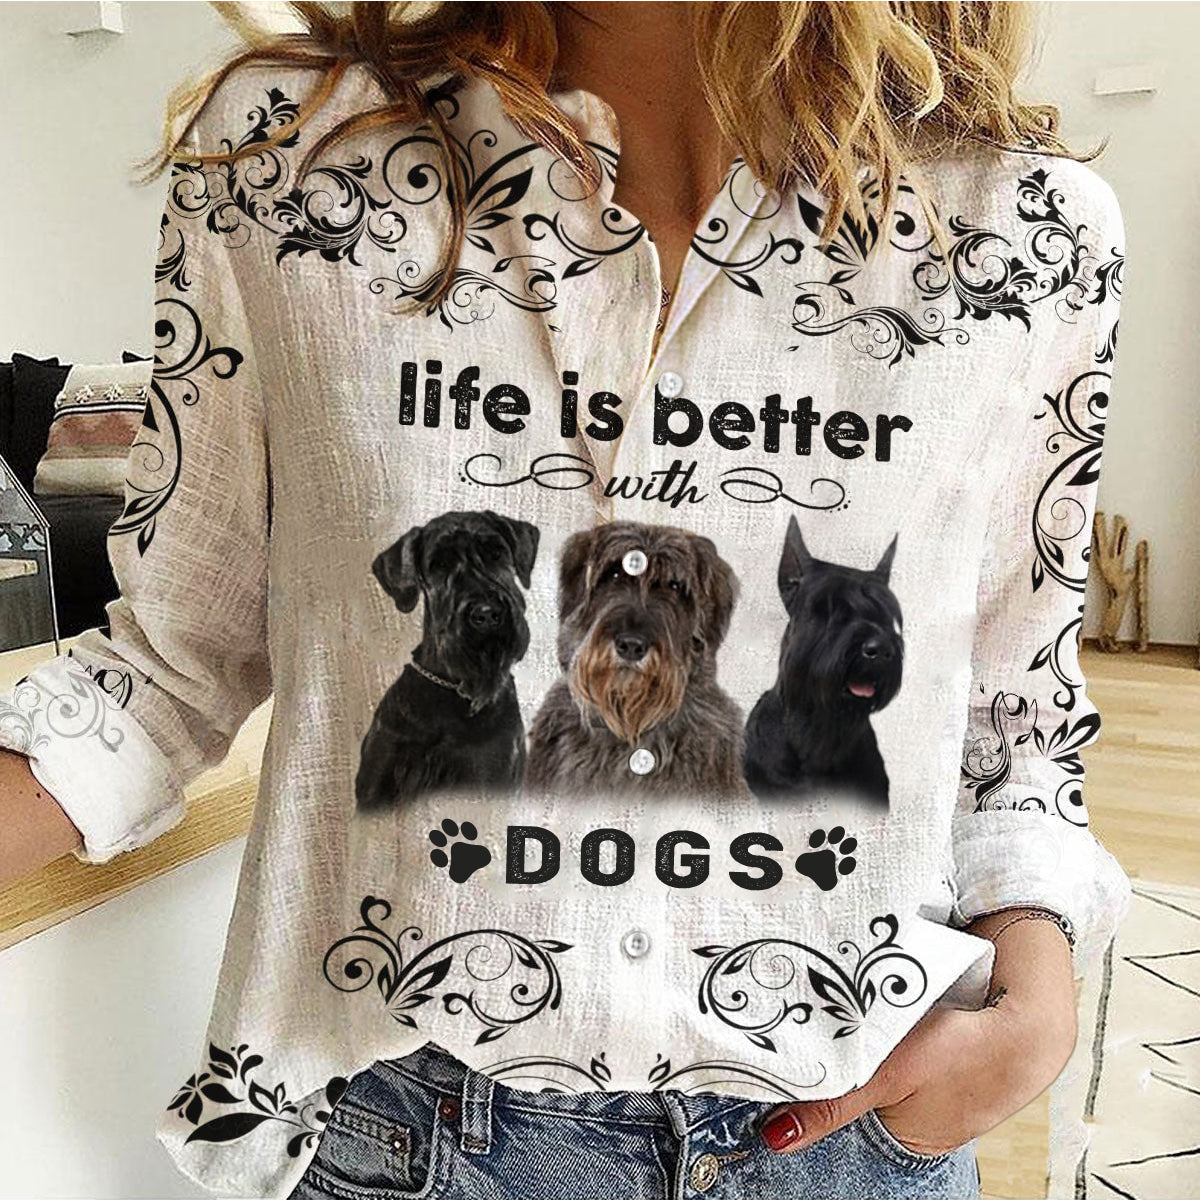 Schnauzer - Life Is Better With Dogs Women's Long-Sleeve Shirt